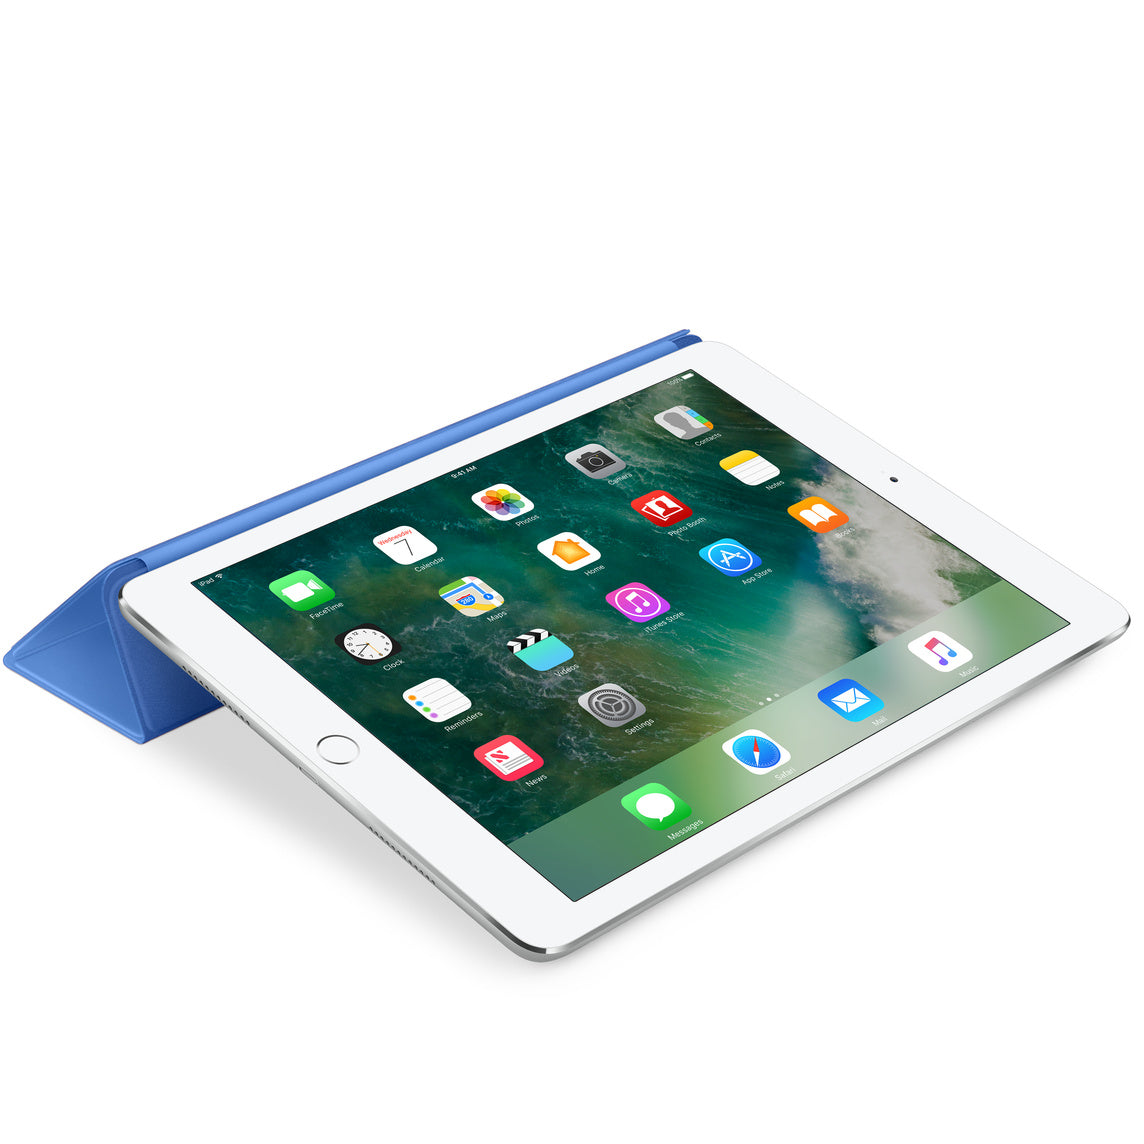 Smart Cover for 9.7-inch iPad Pro - Royal Blue